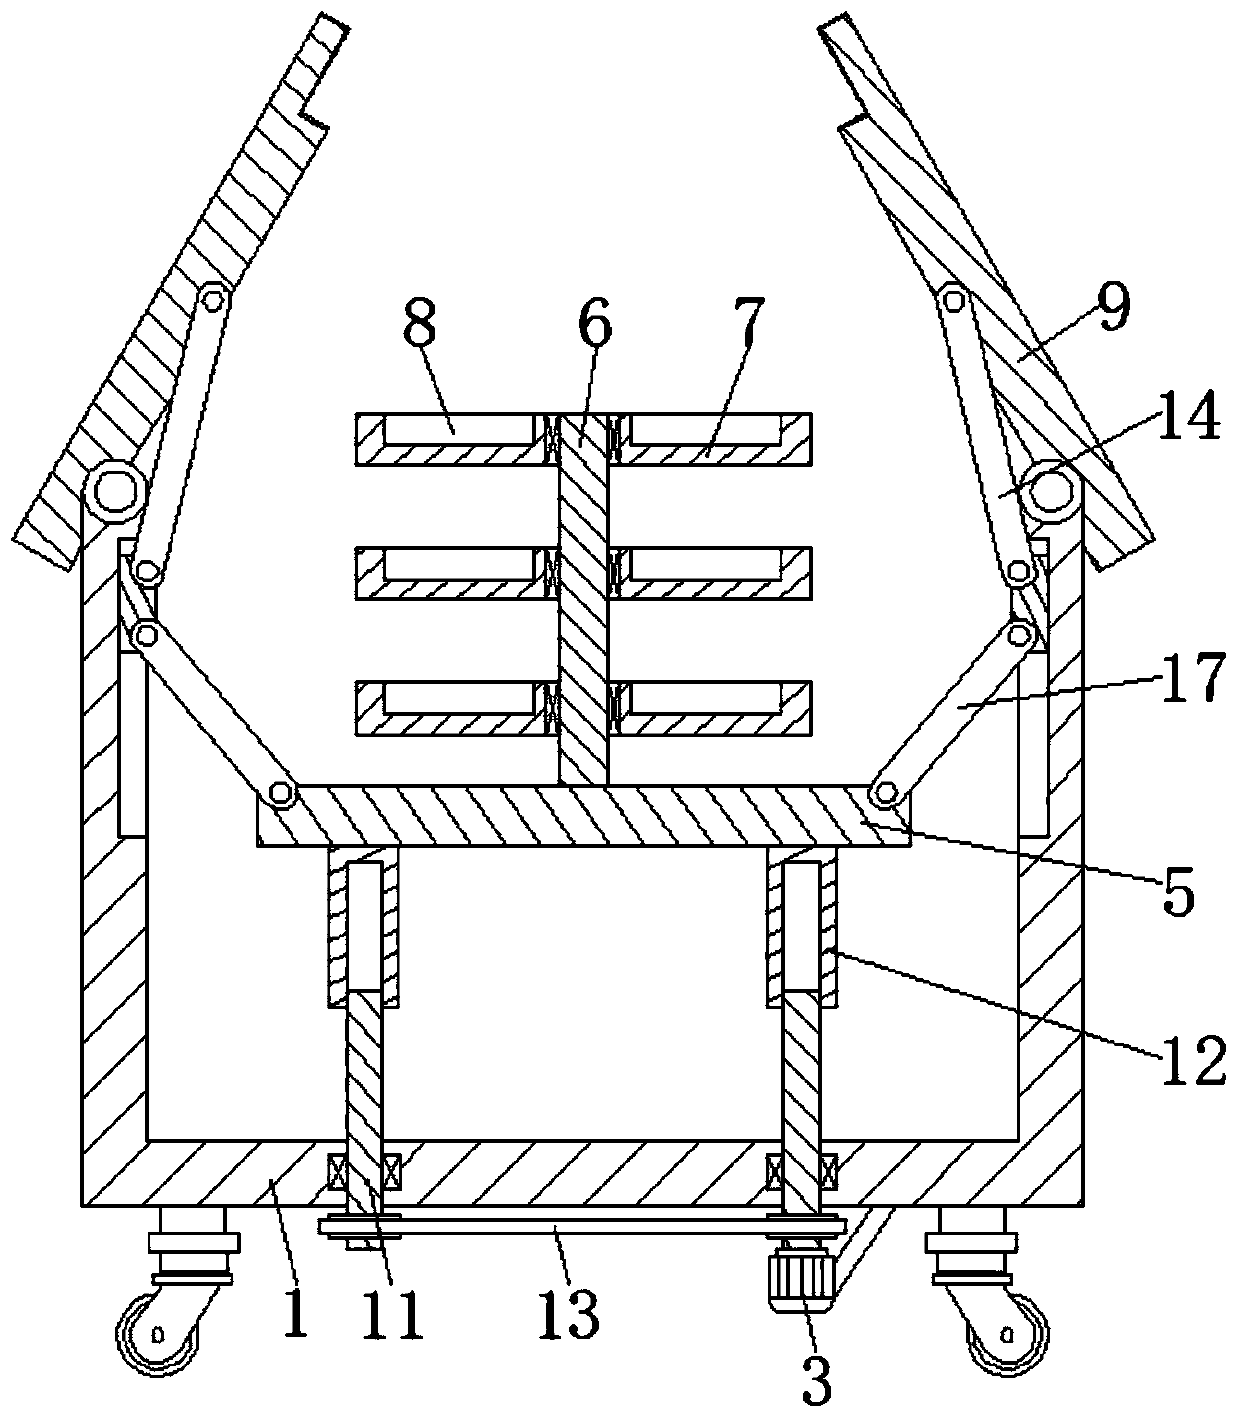 Anesthetic apparatus placement device for anesthesiology department use